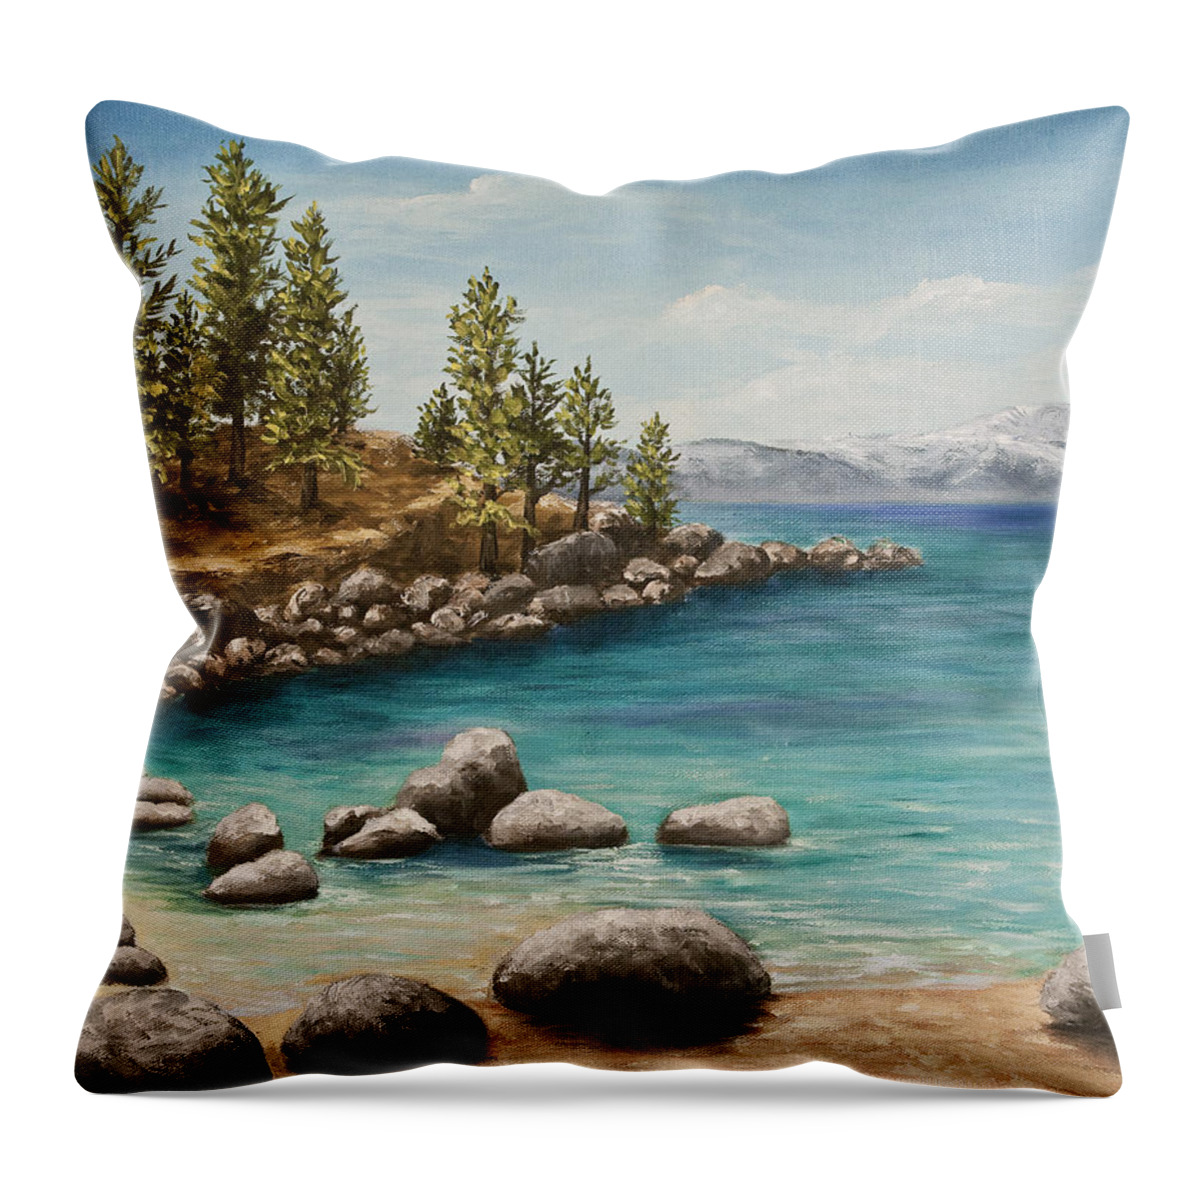 Landscape Throw Pillow featuring the painting Sand Harbor Lake Tahoe by Darice Machel McGuire